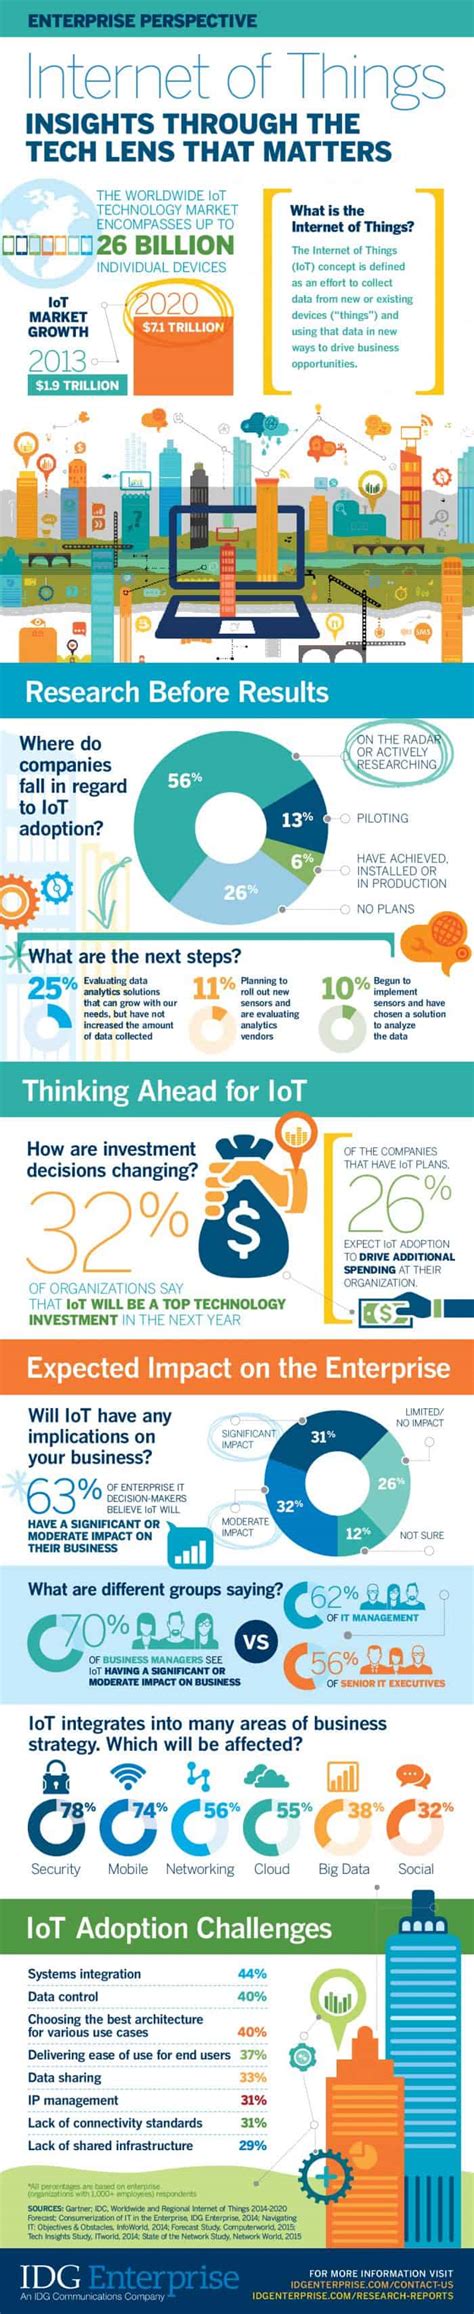 Internet of Things: Insights through the Tech Lens that Matters [Infographic] | Daily Infographic